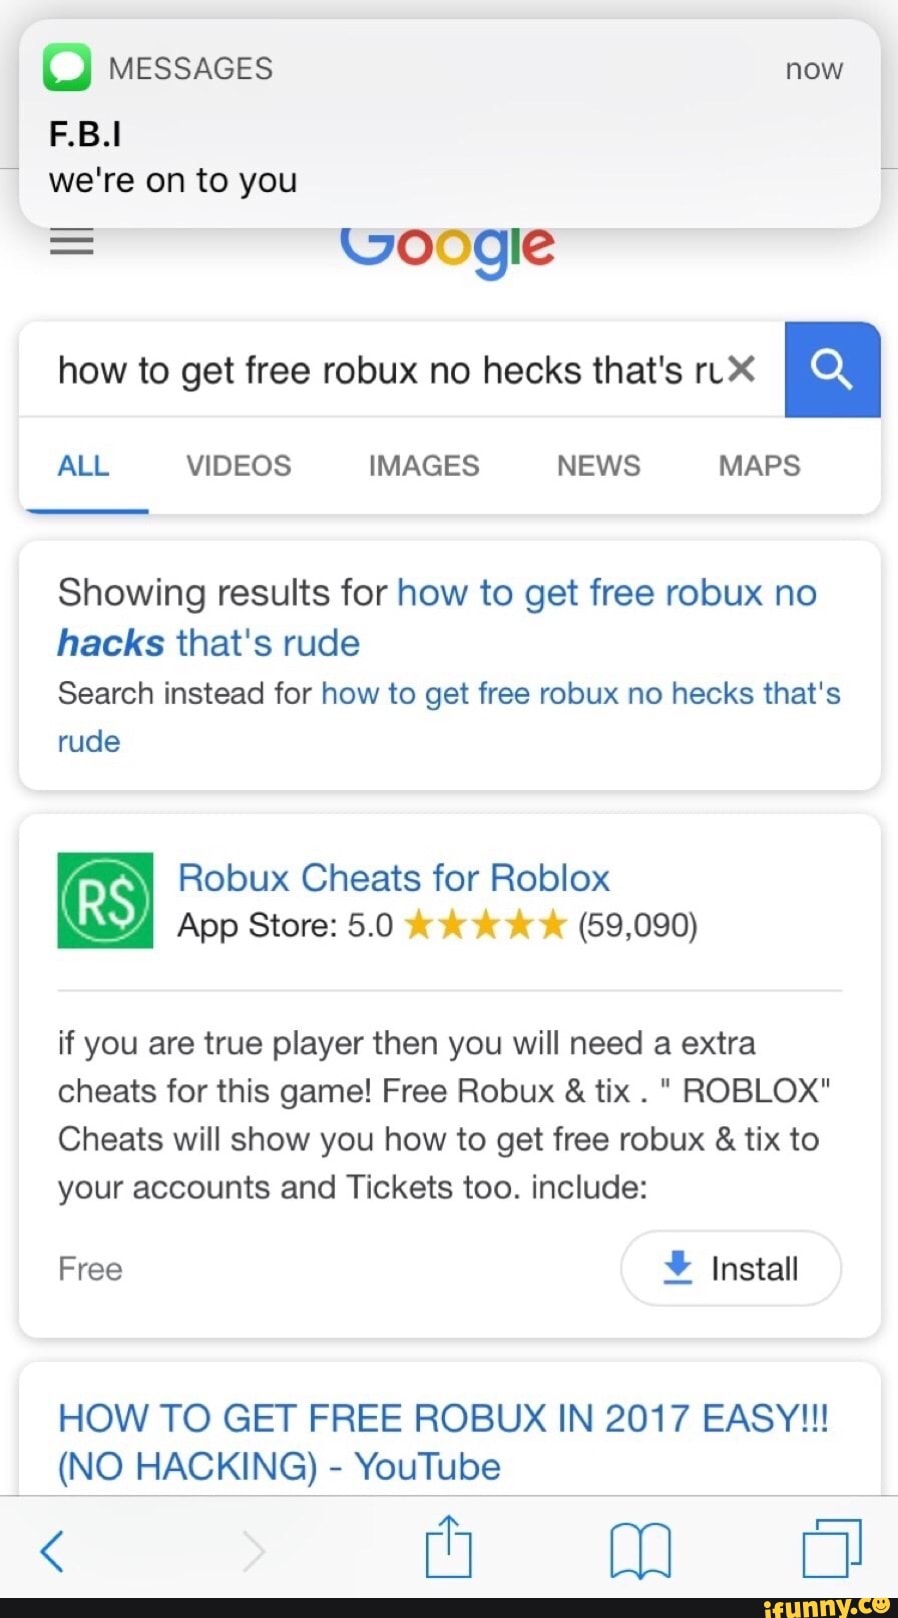 We Re On To You D Messages Now How To Get Free Robux No Hecks That S Rlx Showing Results For How To Get Free Robux No Hacks That S Rude Search Instead For How - the truth about tix roblox youtube